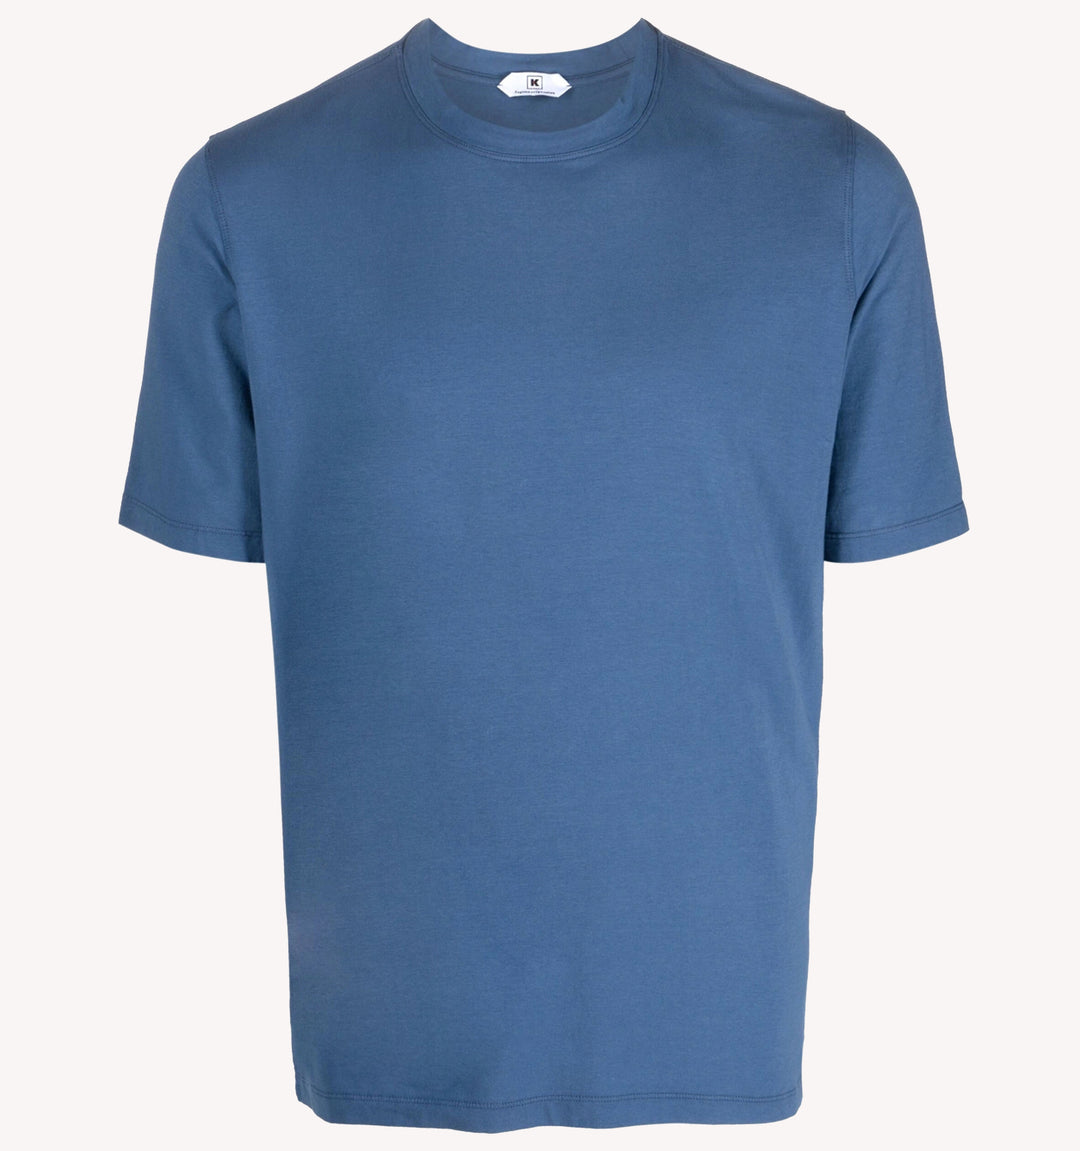 Kired T-Shirt in Blue Grey